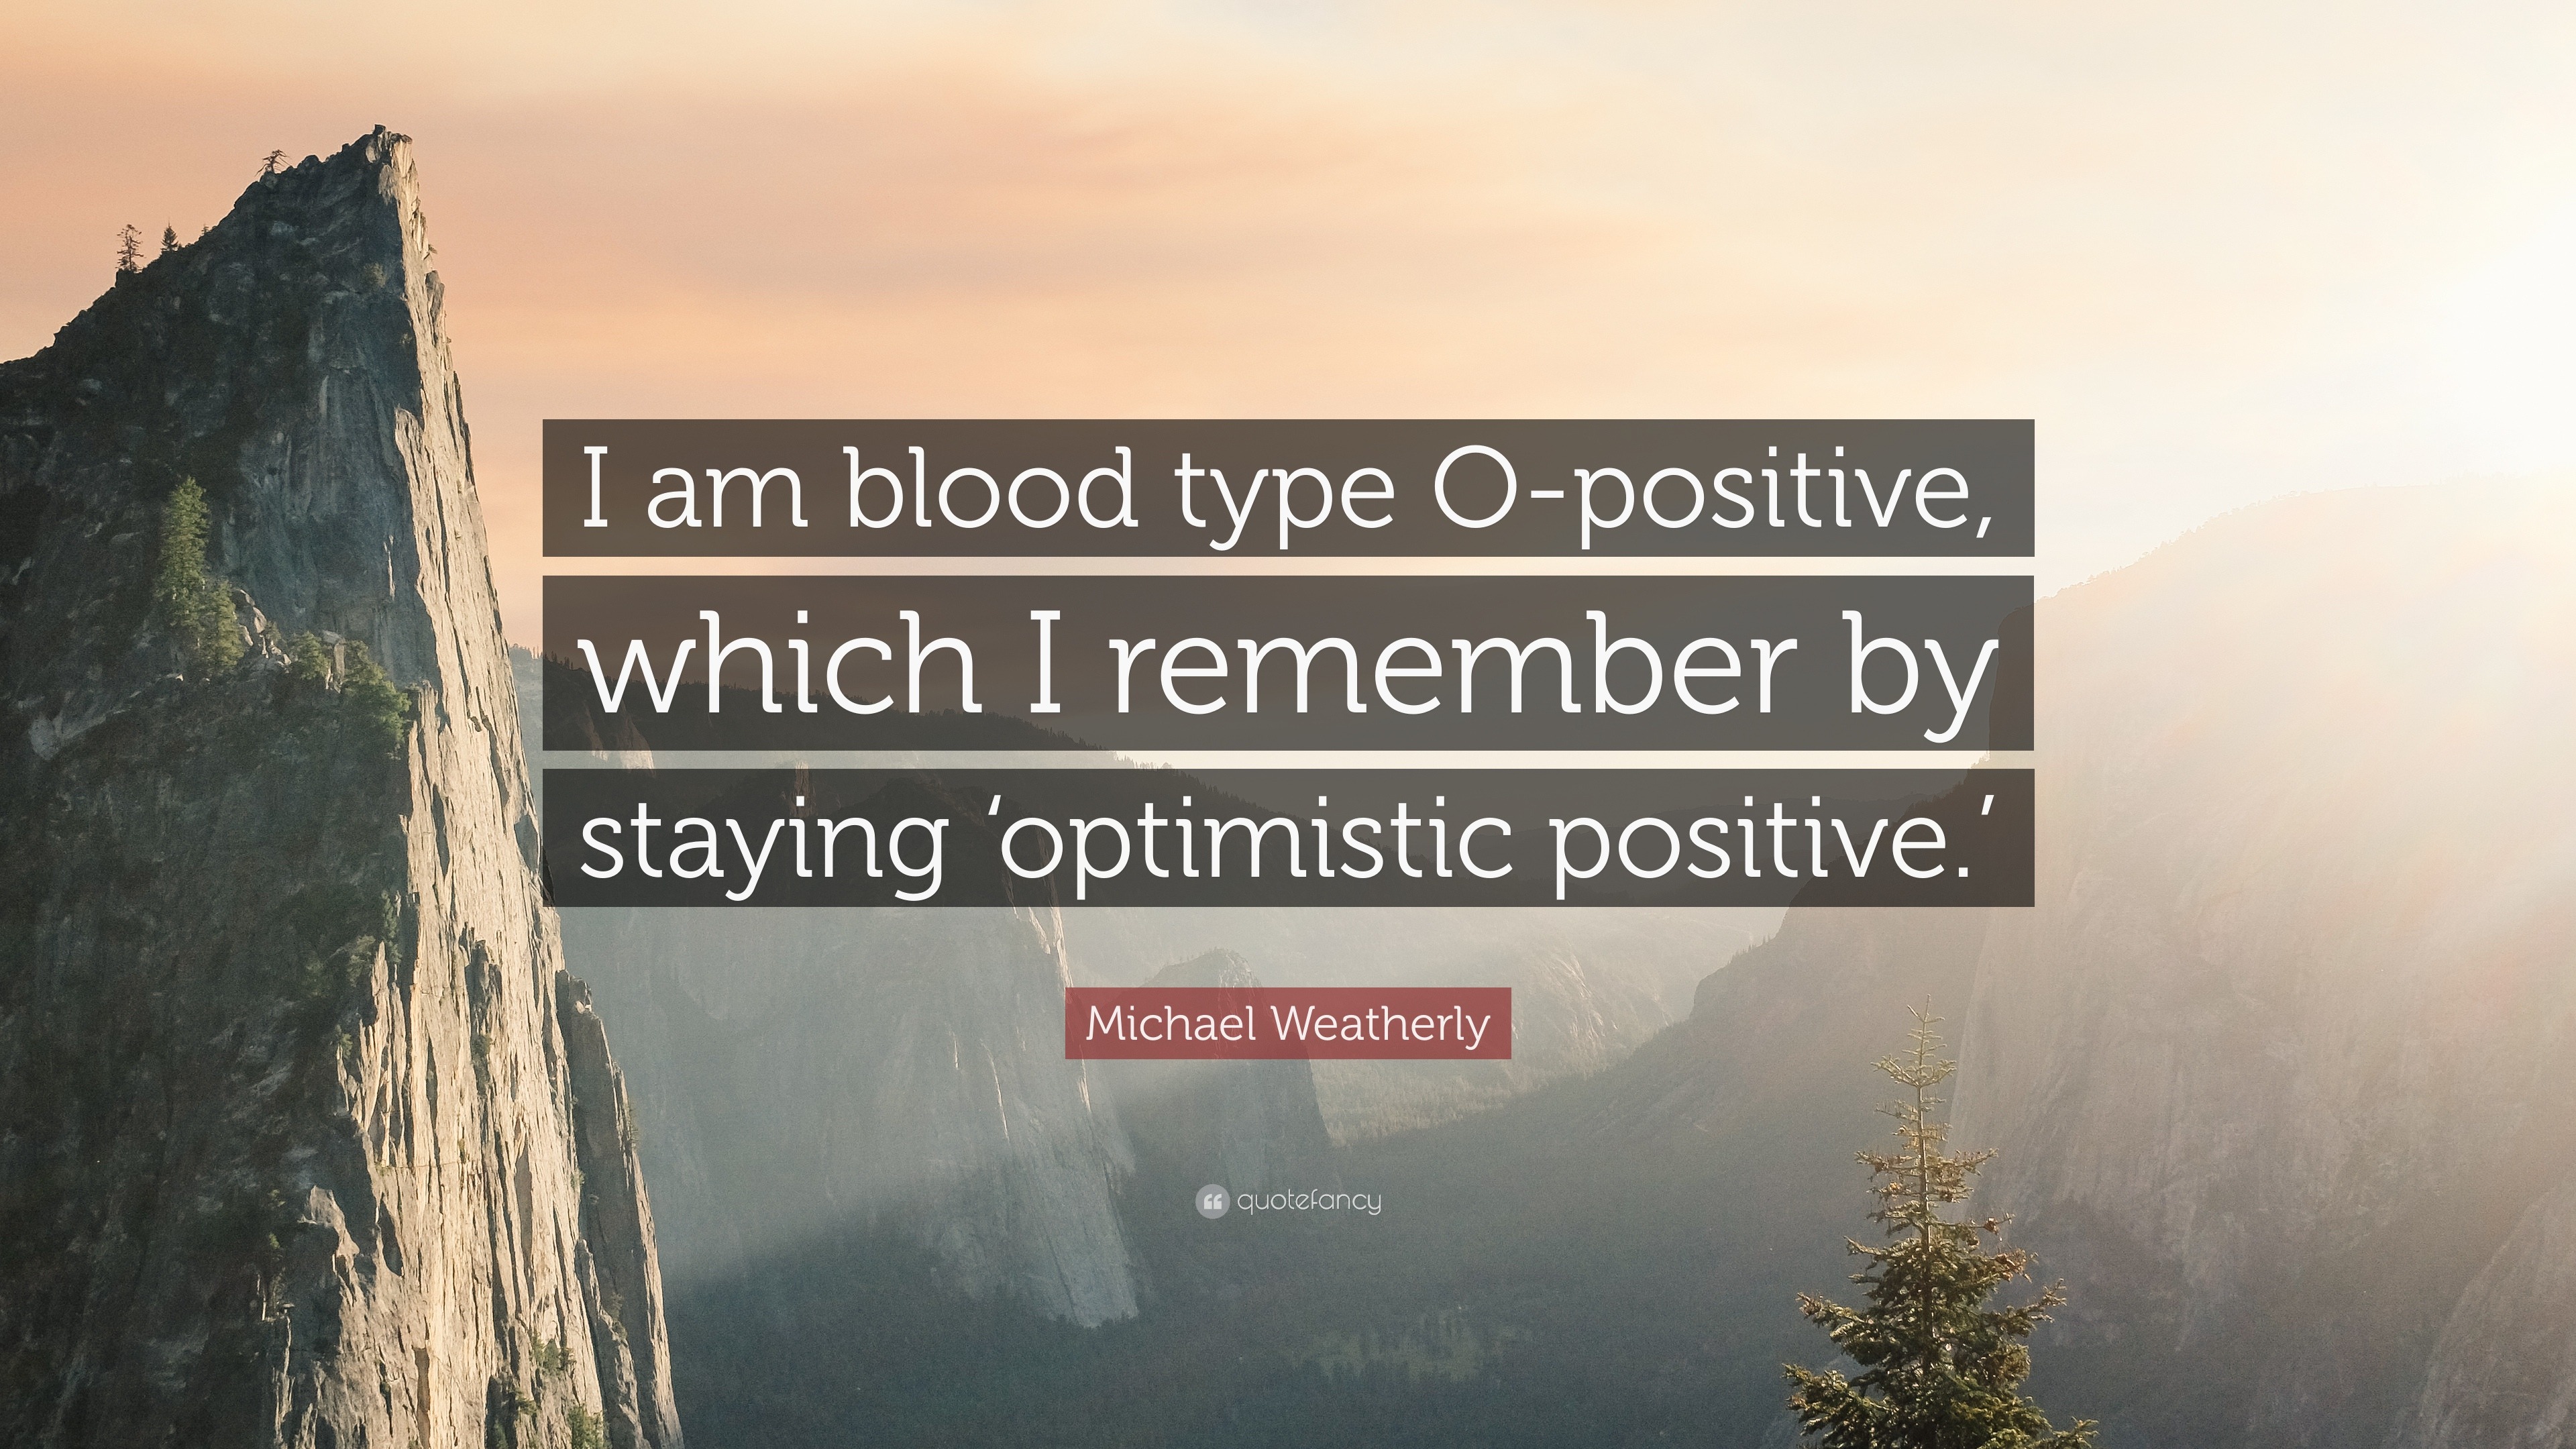 Michael Weatherly Quote: “I am blood type O-positive, which I